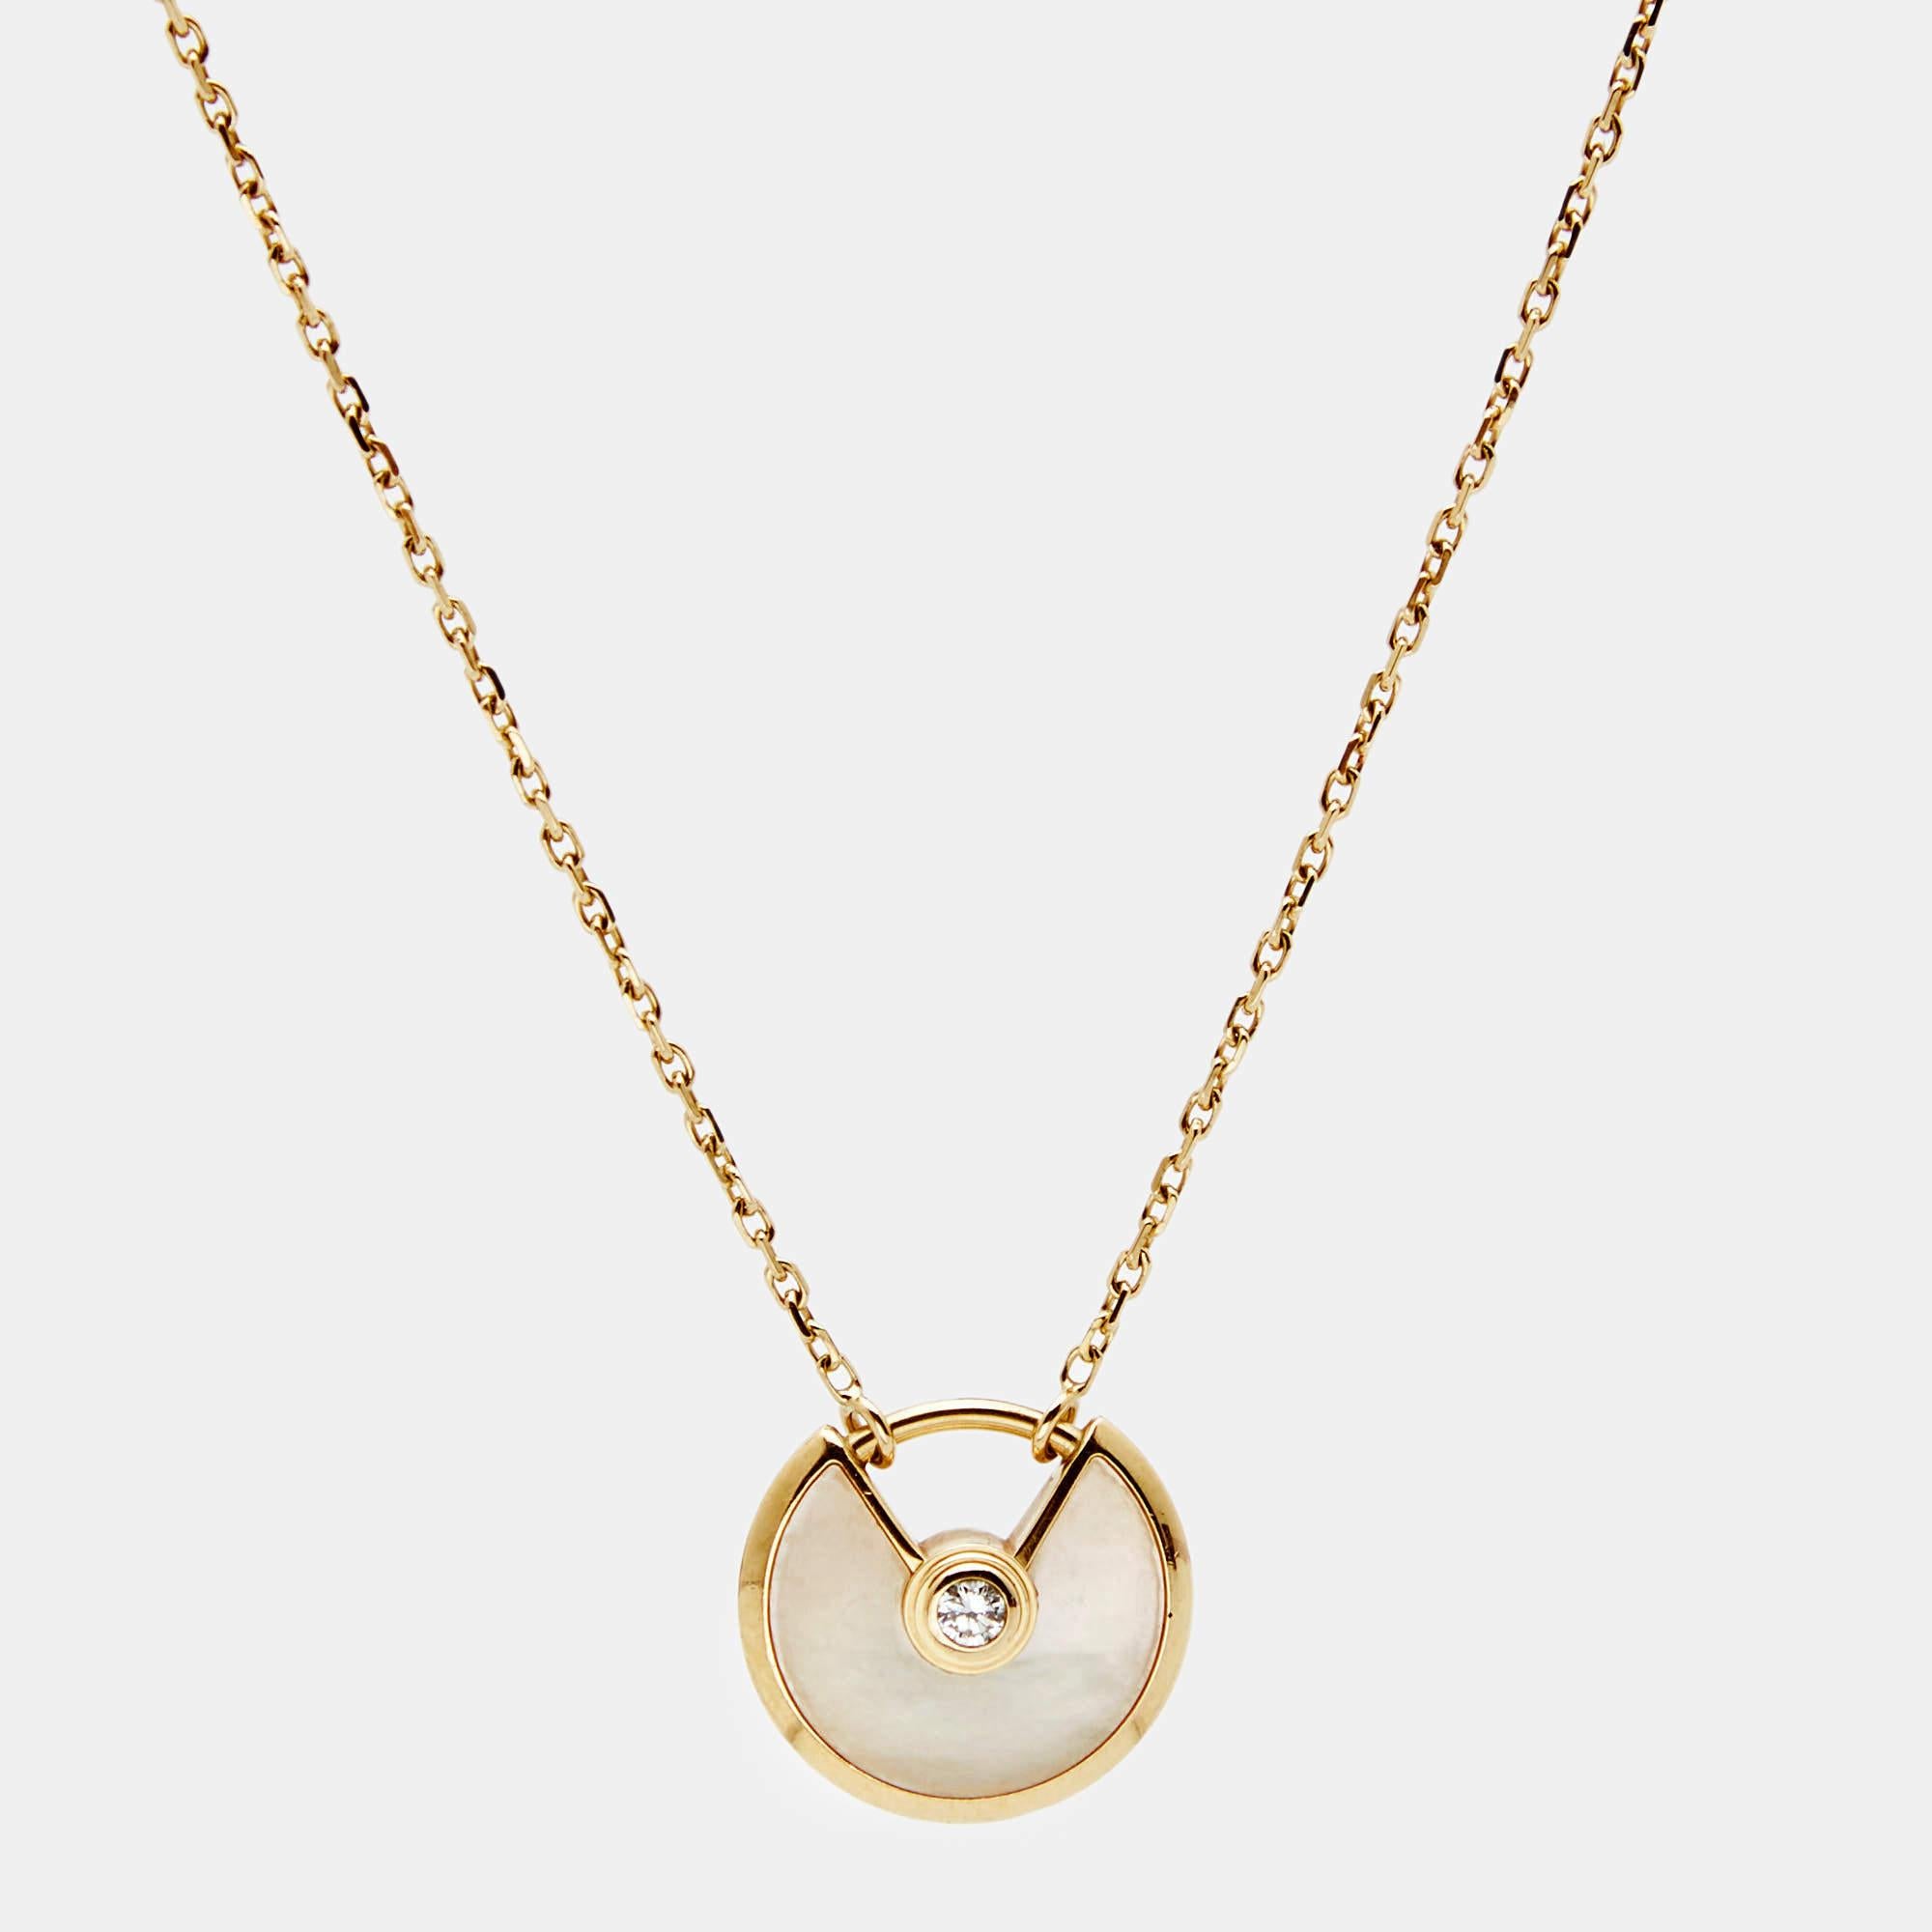 The elegant and sophisticated designs from Cartier are loved by everyone, and this Amulette de Cartier necklace is subtly elegant as well as beautifully luxurious. Constructed in 18K yellow gold, this necklace features a disc charm that is inlaid